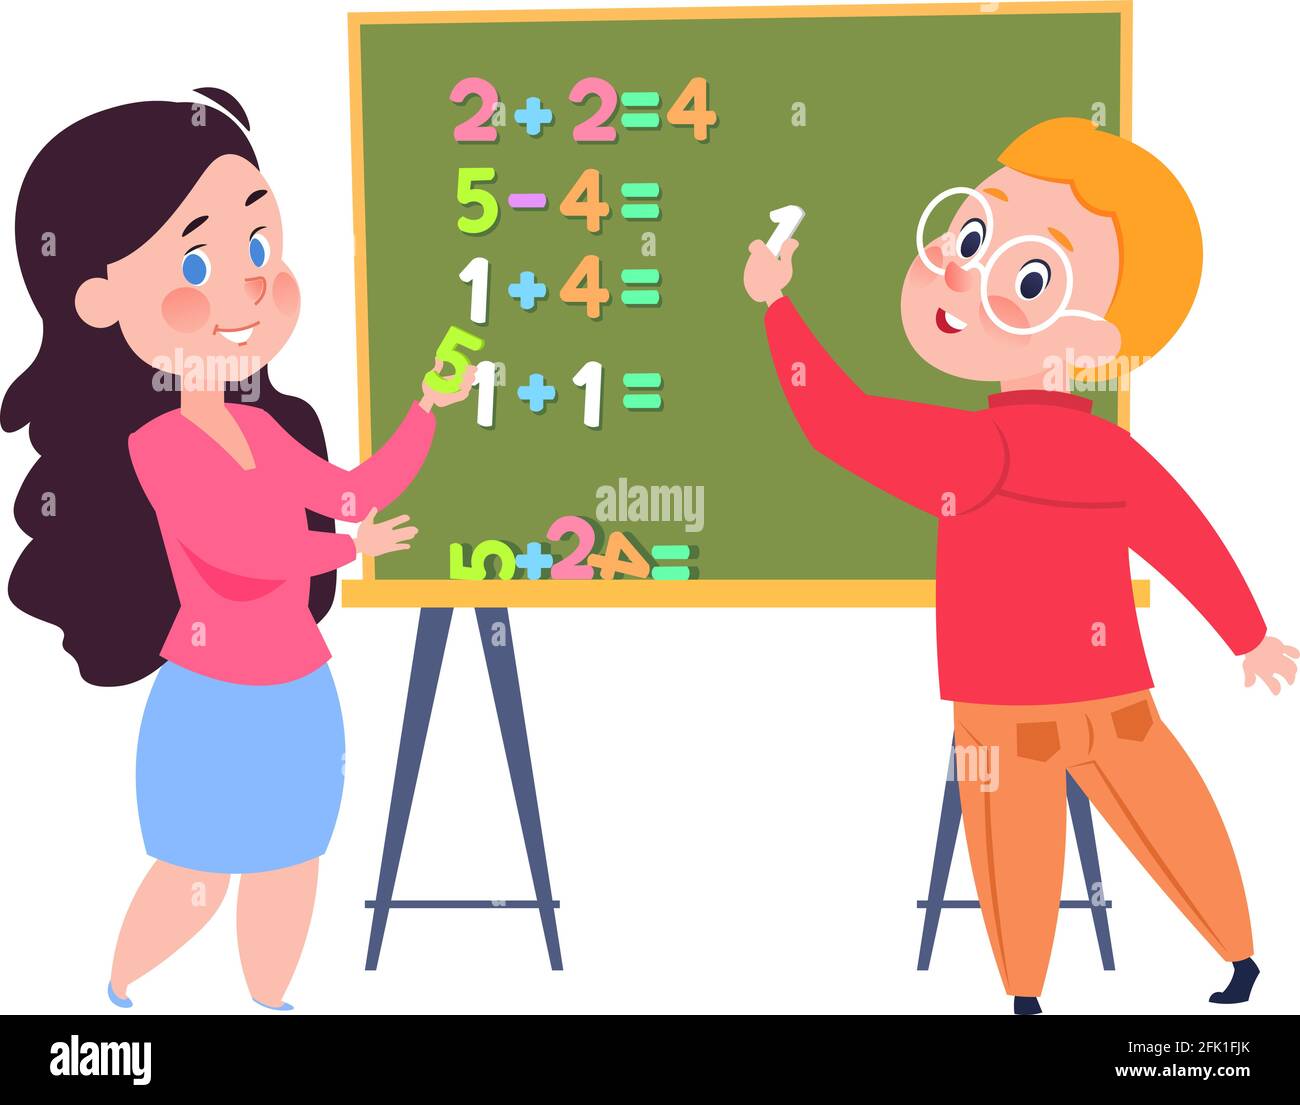 Boy learns count. Arithmetic lesson for toddlers, children play in school. Sister and brother doing homework together vector illustration Stock Vector